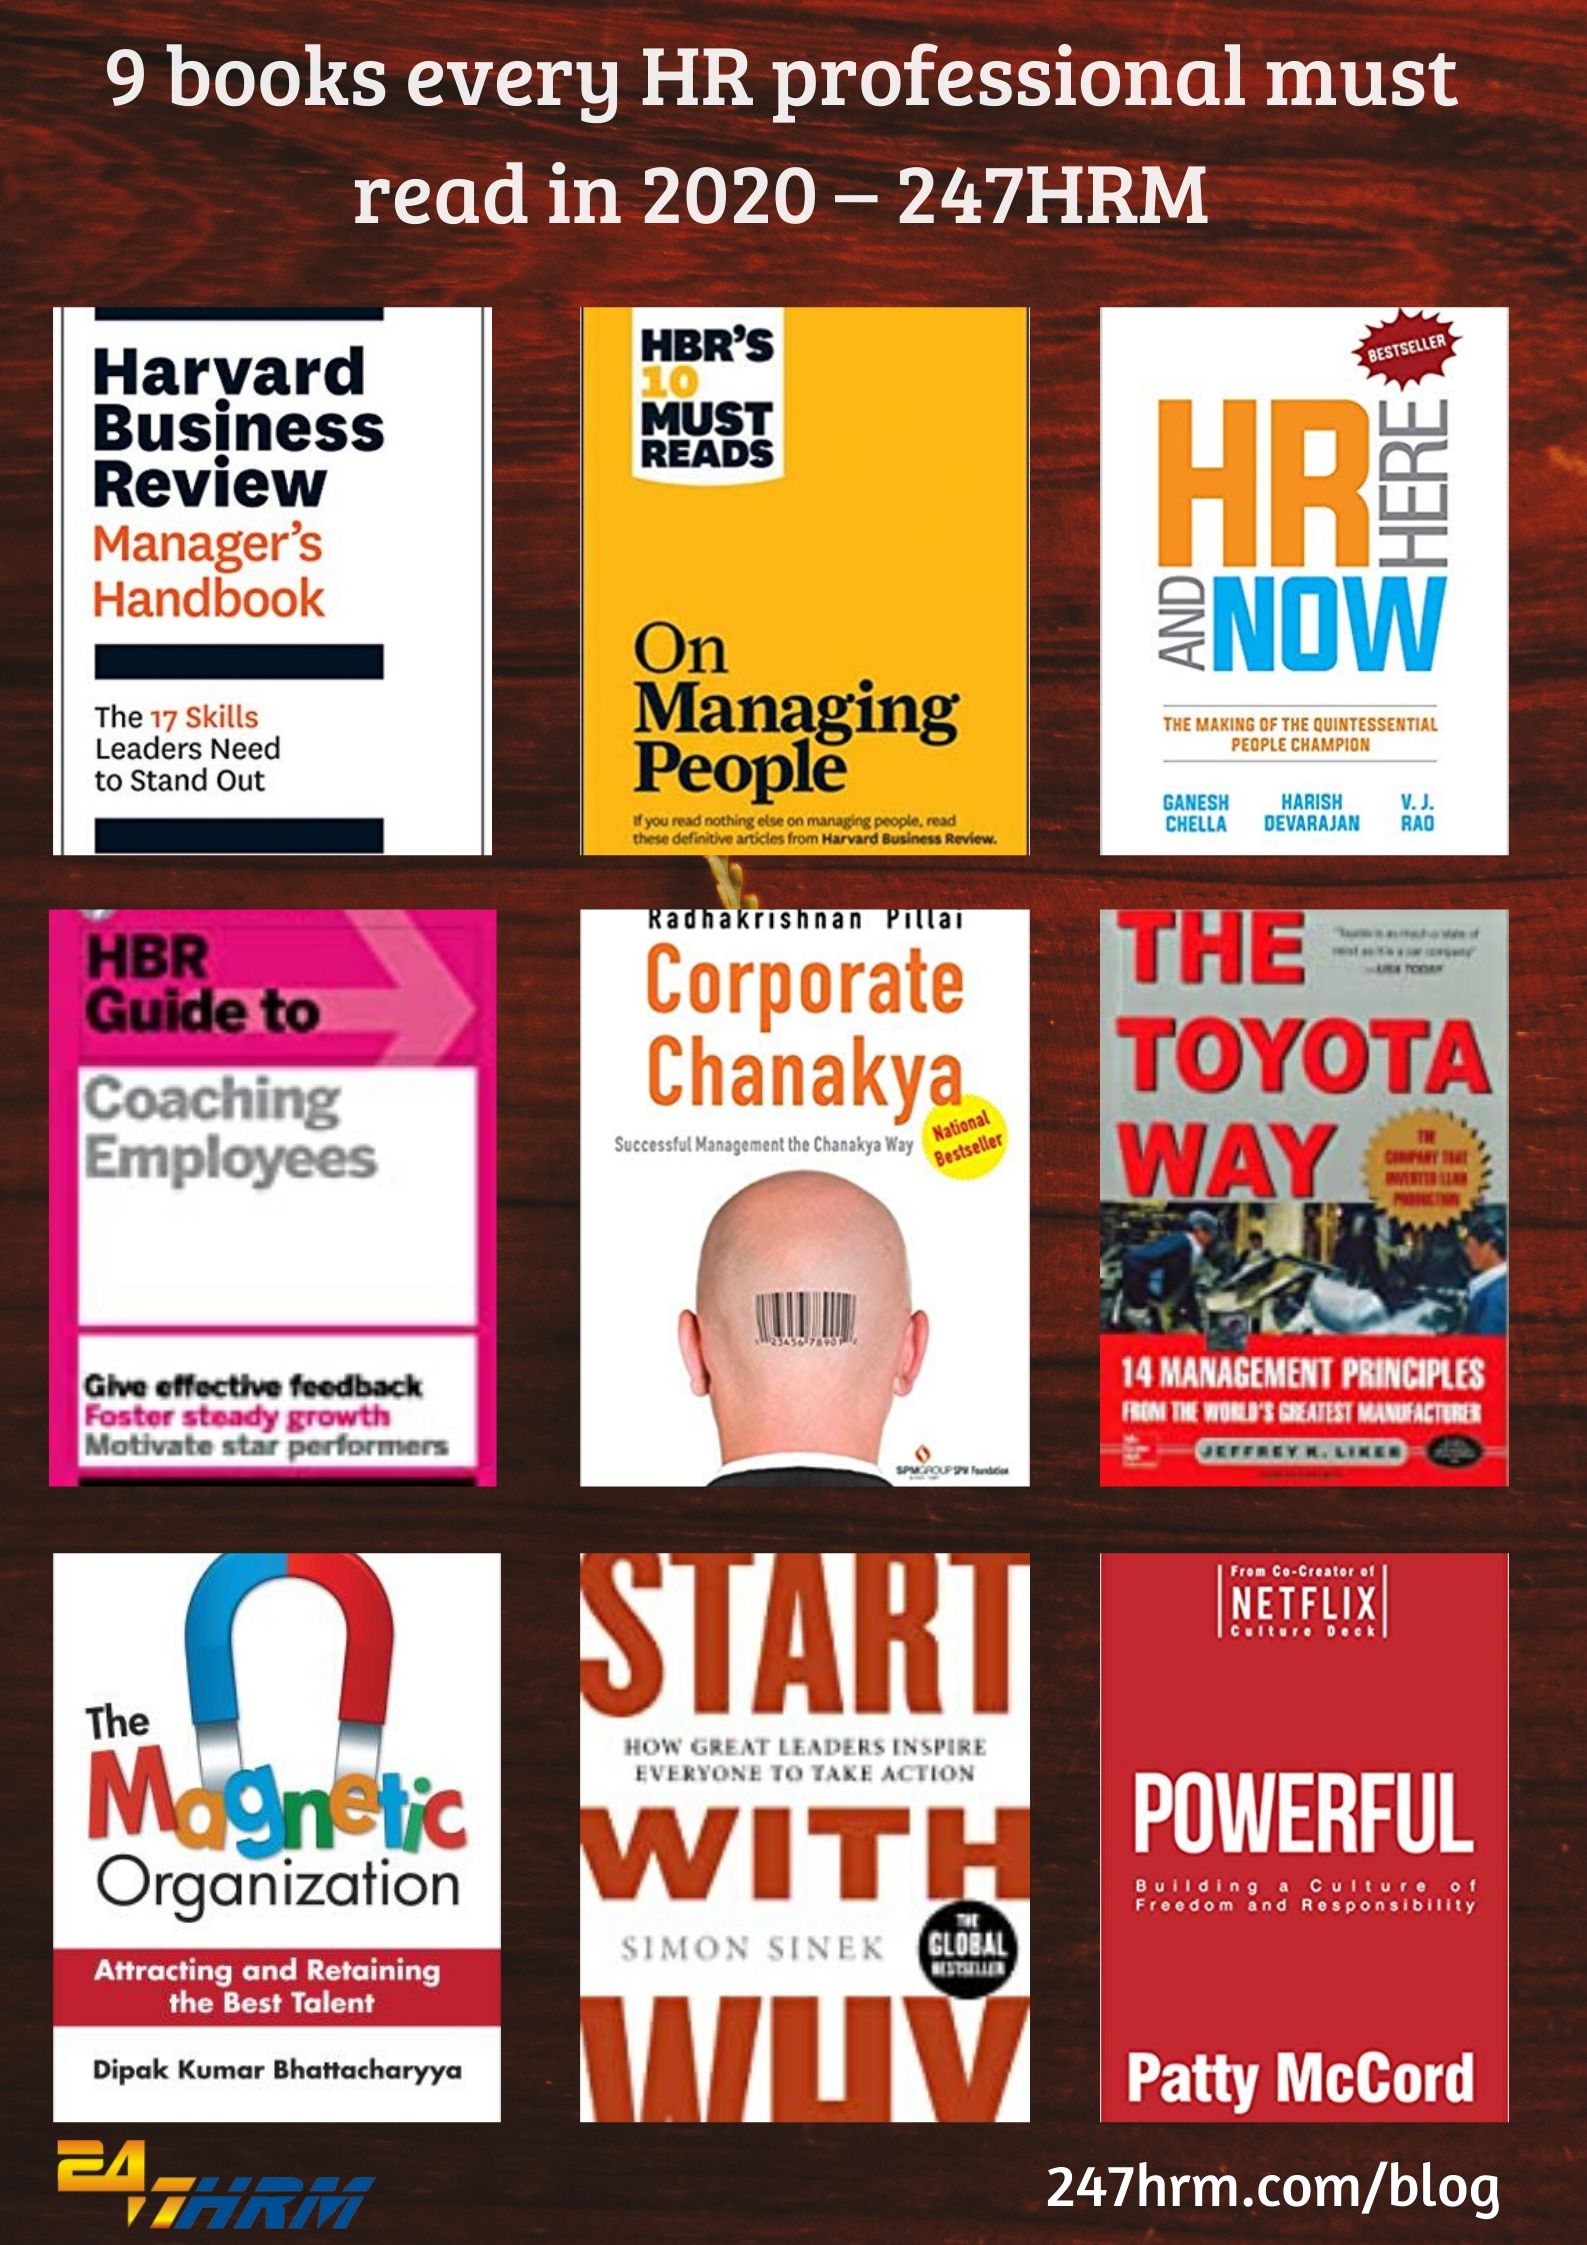 9 books every HR professional must read in 2020